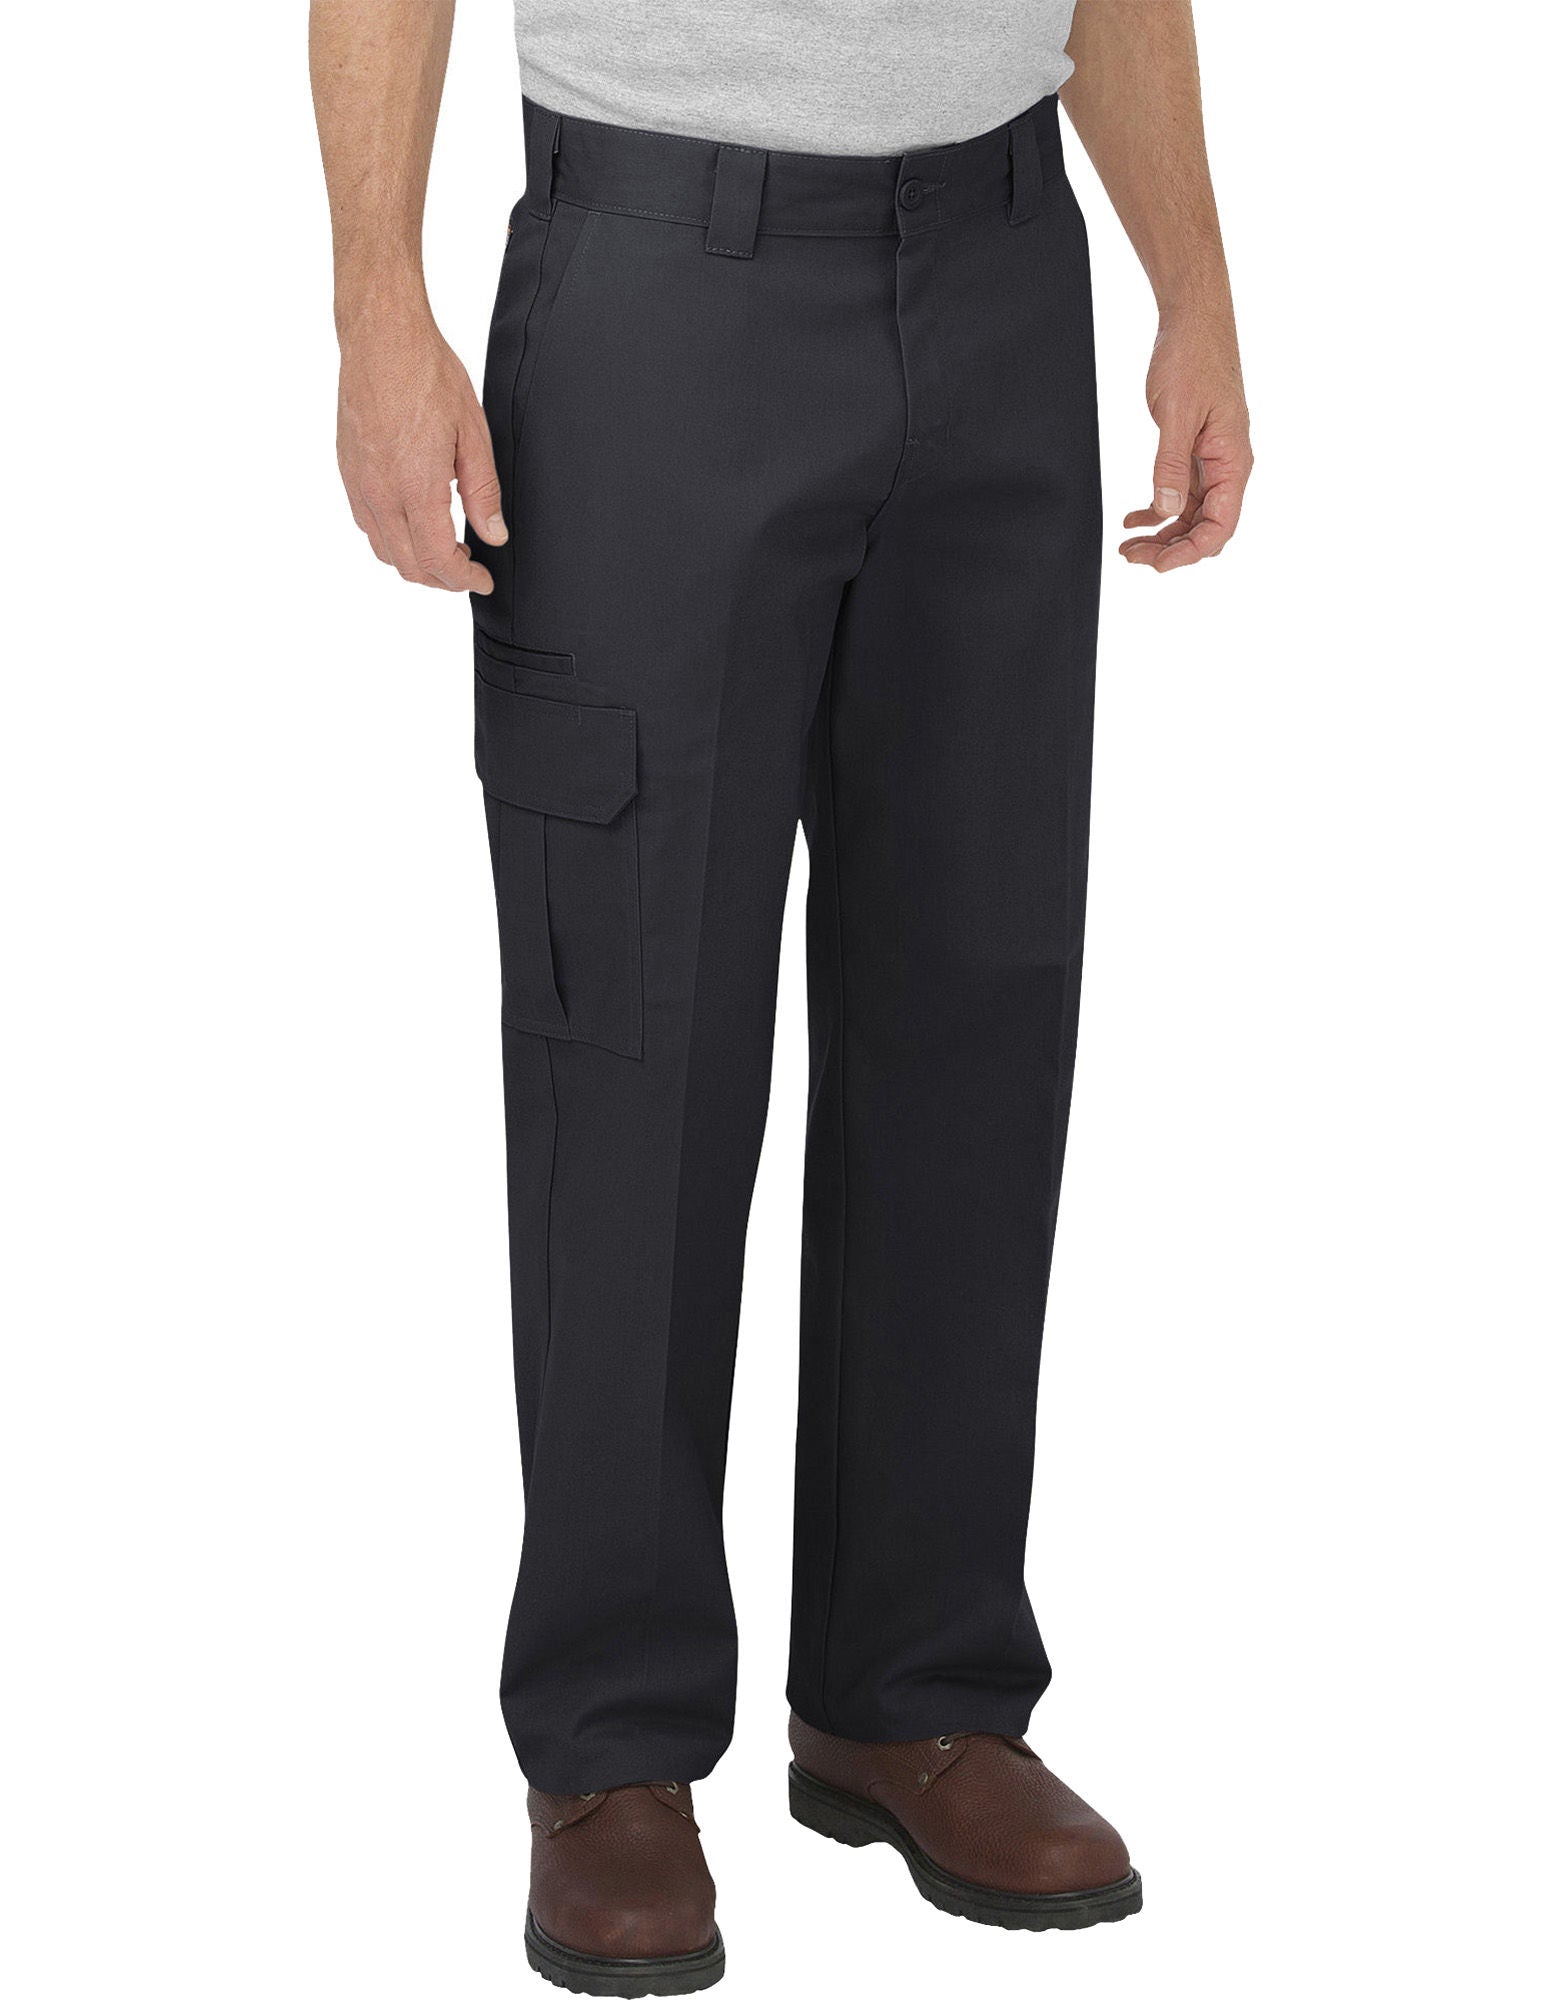 DIC-WP598 - Dickies Mens FLEX Relaxed Fit Straight Leg Cargo Pants